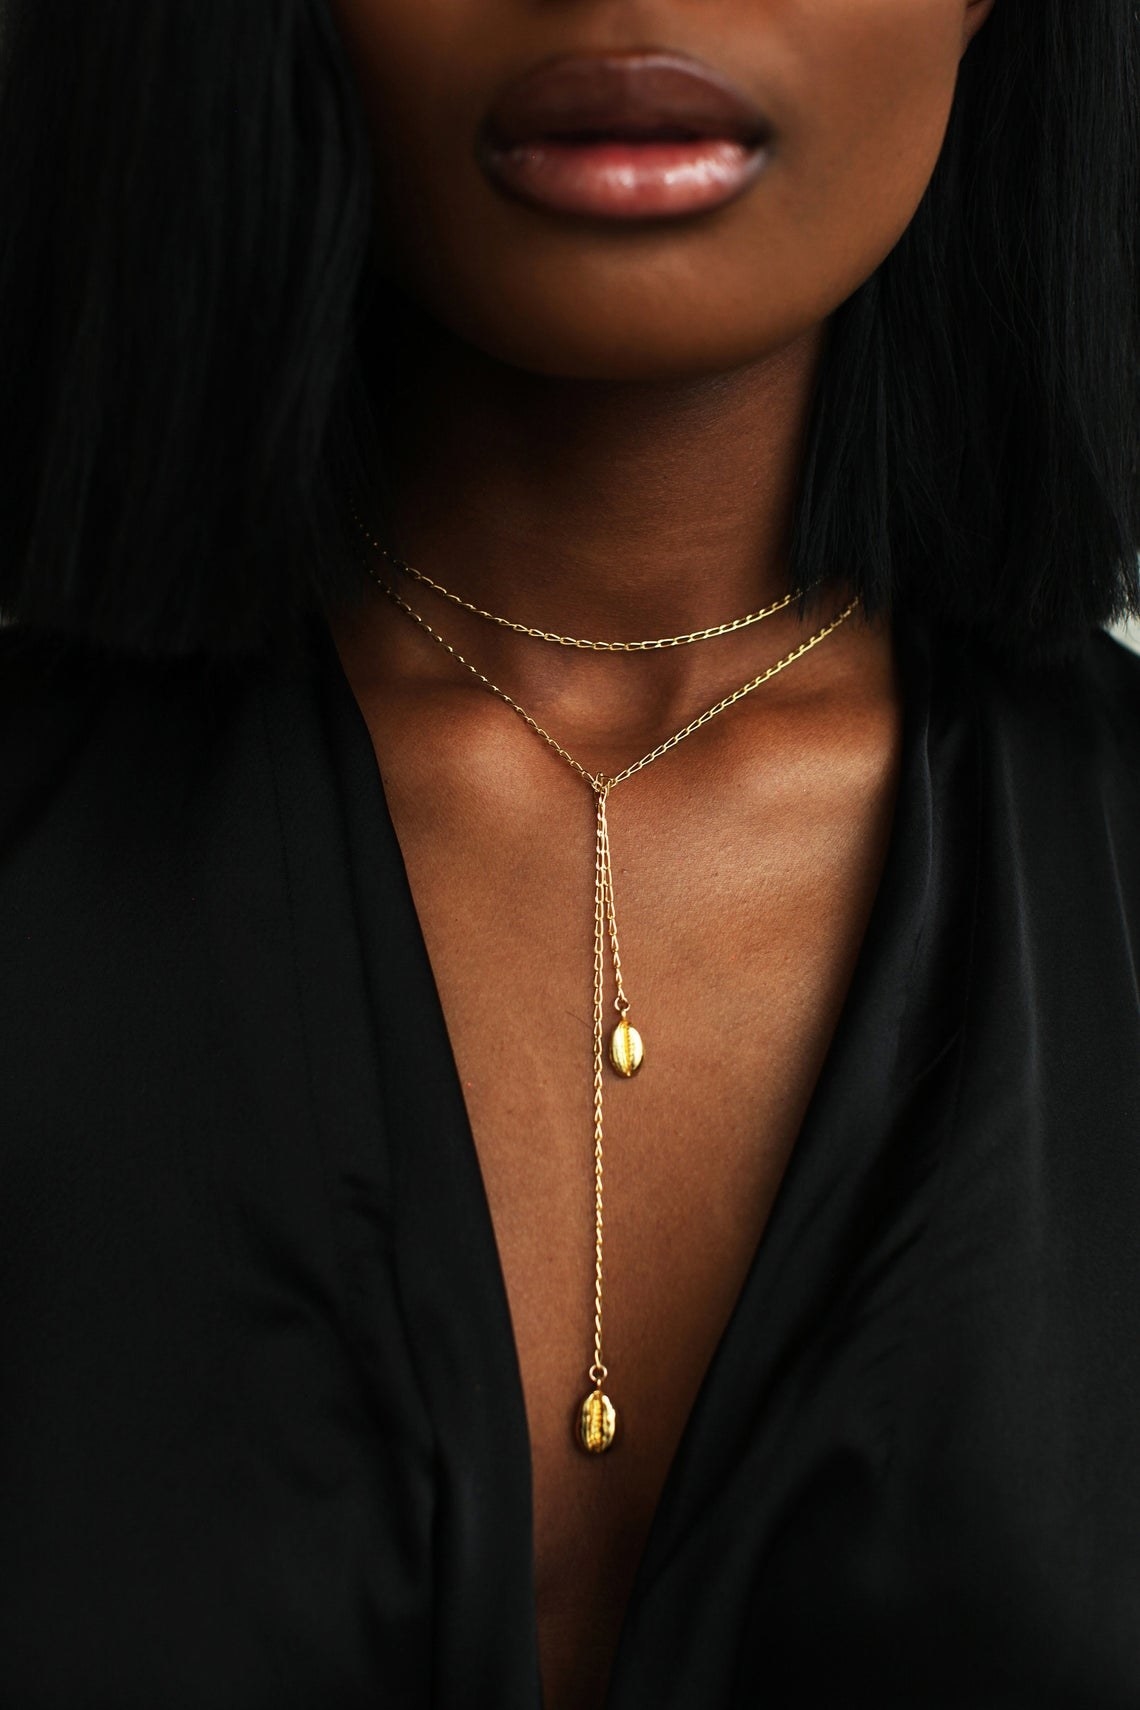 A model wearing the gold necklace. It has two cowrie shells in gold on either end and a long chain that can be worn around the neck or cascading down the chest 